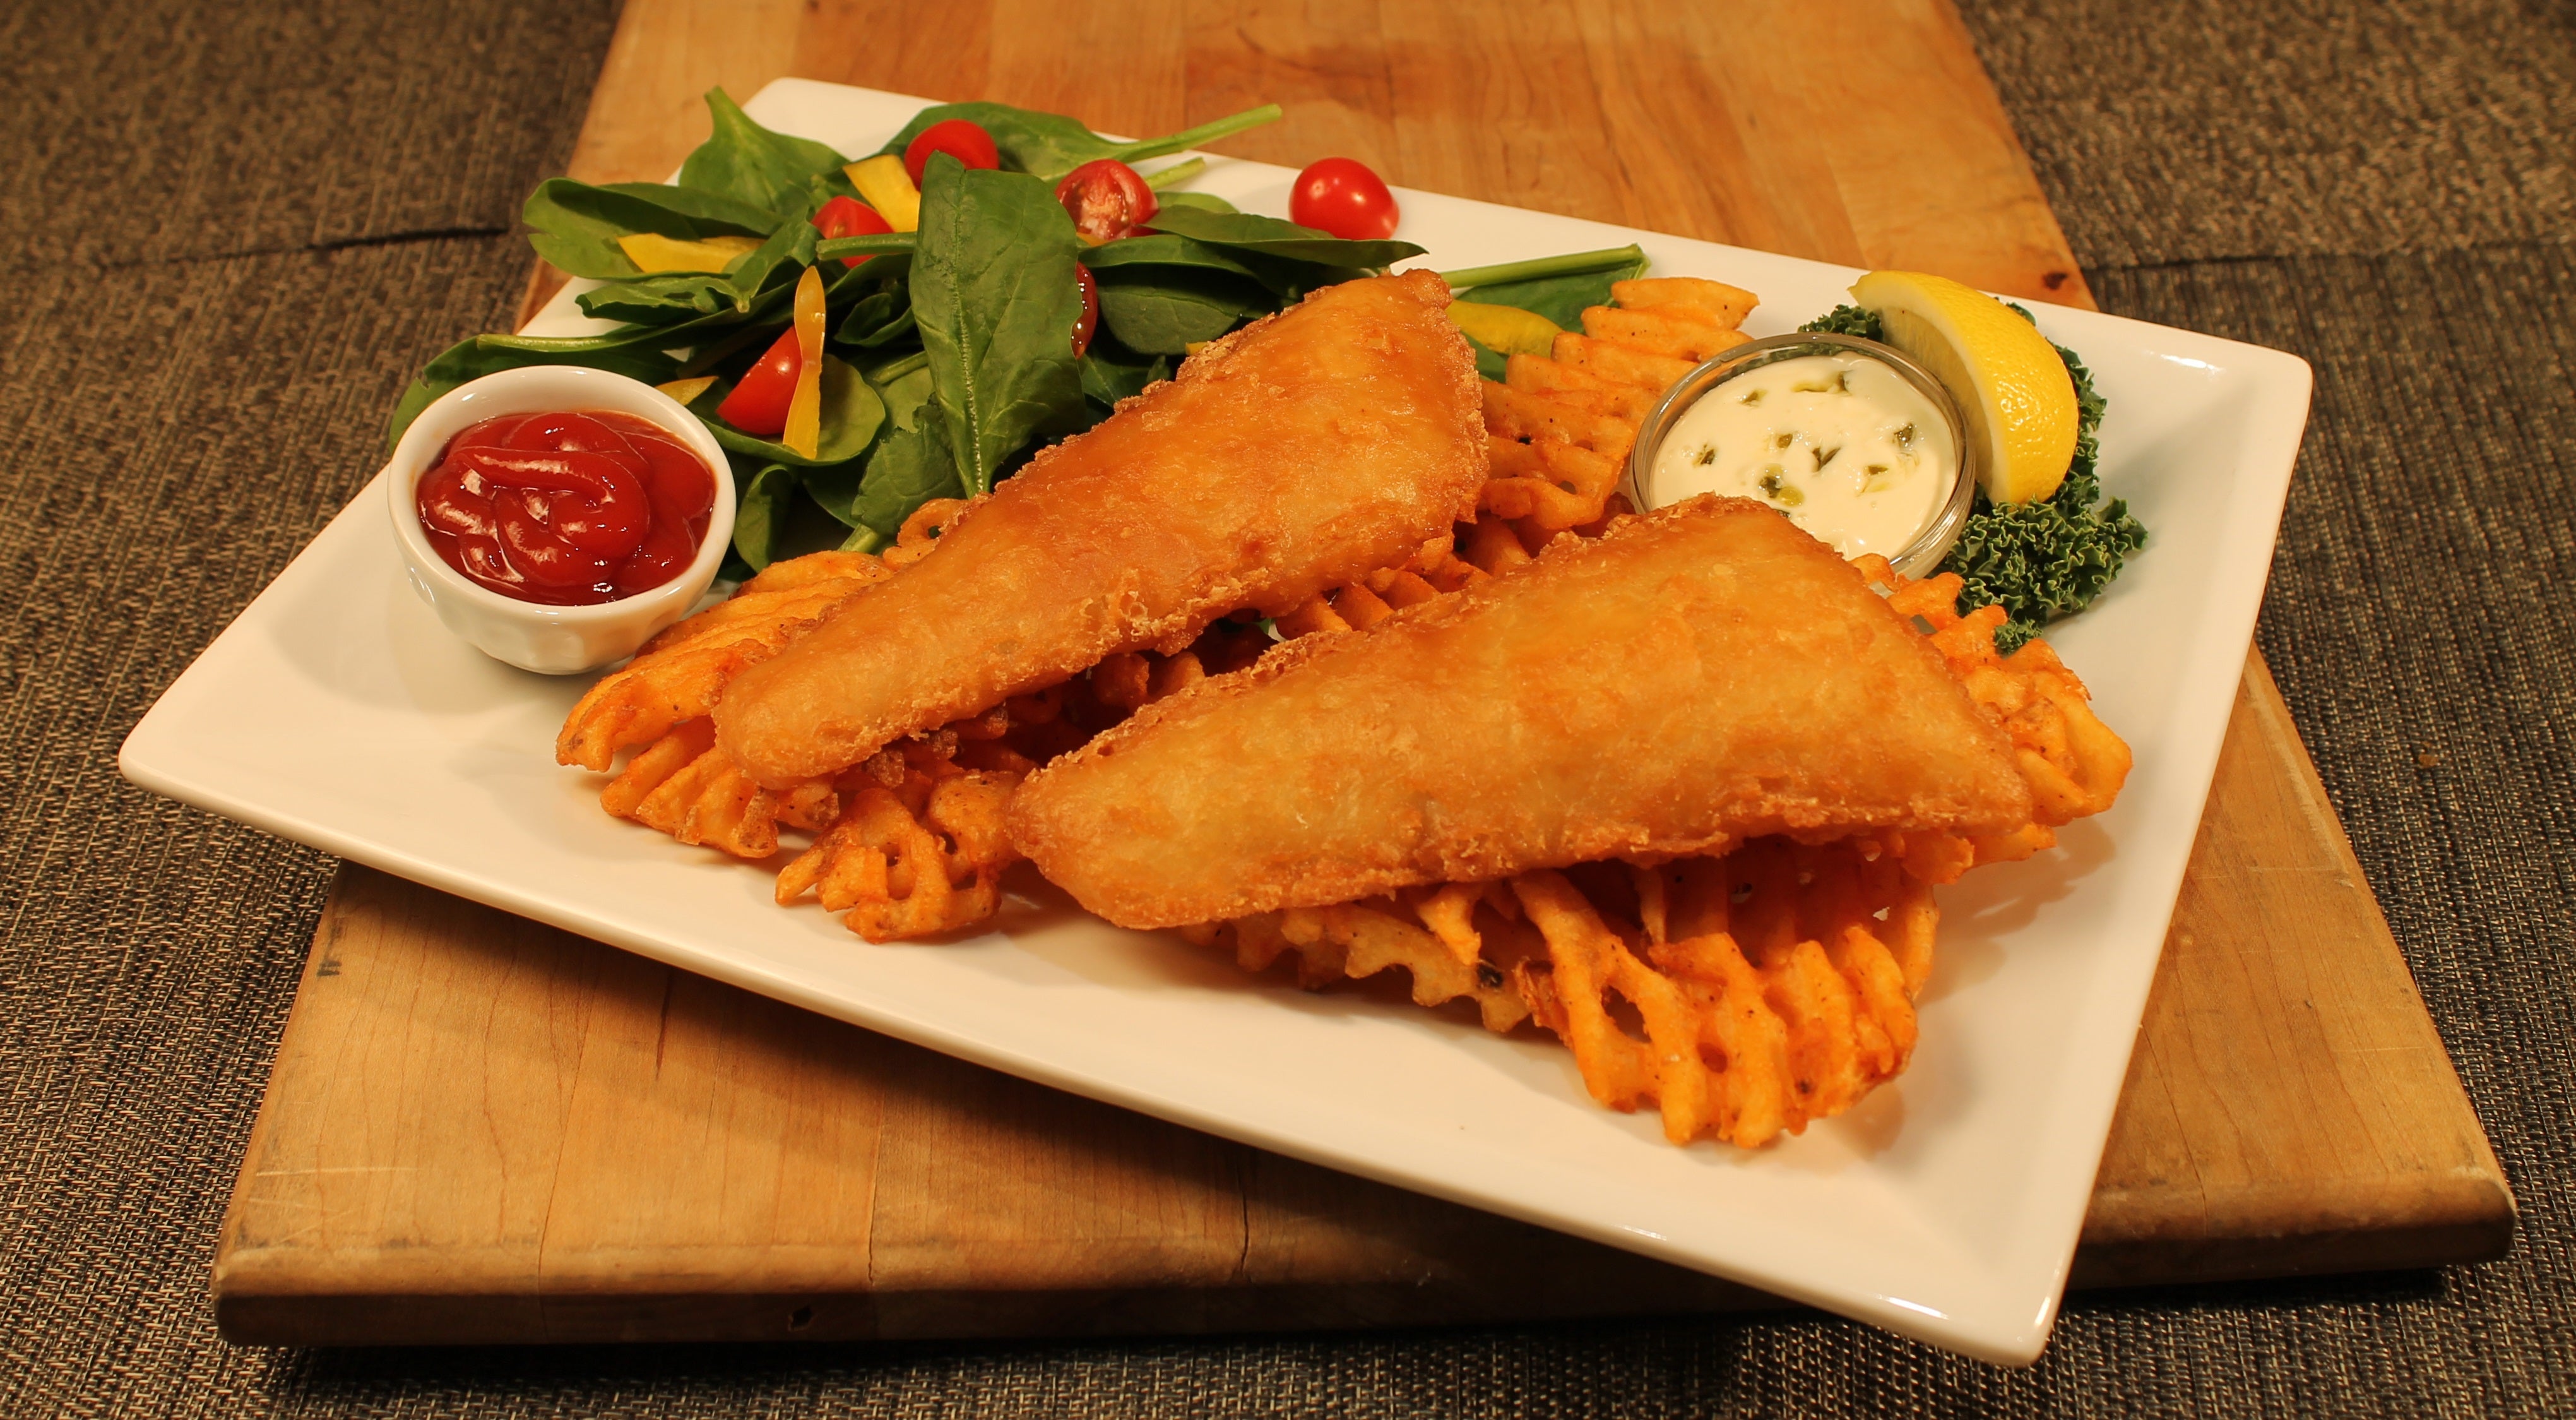 Pacific Cod Fillet with Giant Joe Batter - 3 oz portions, 10 lbs